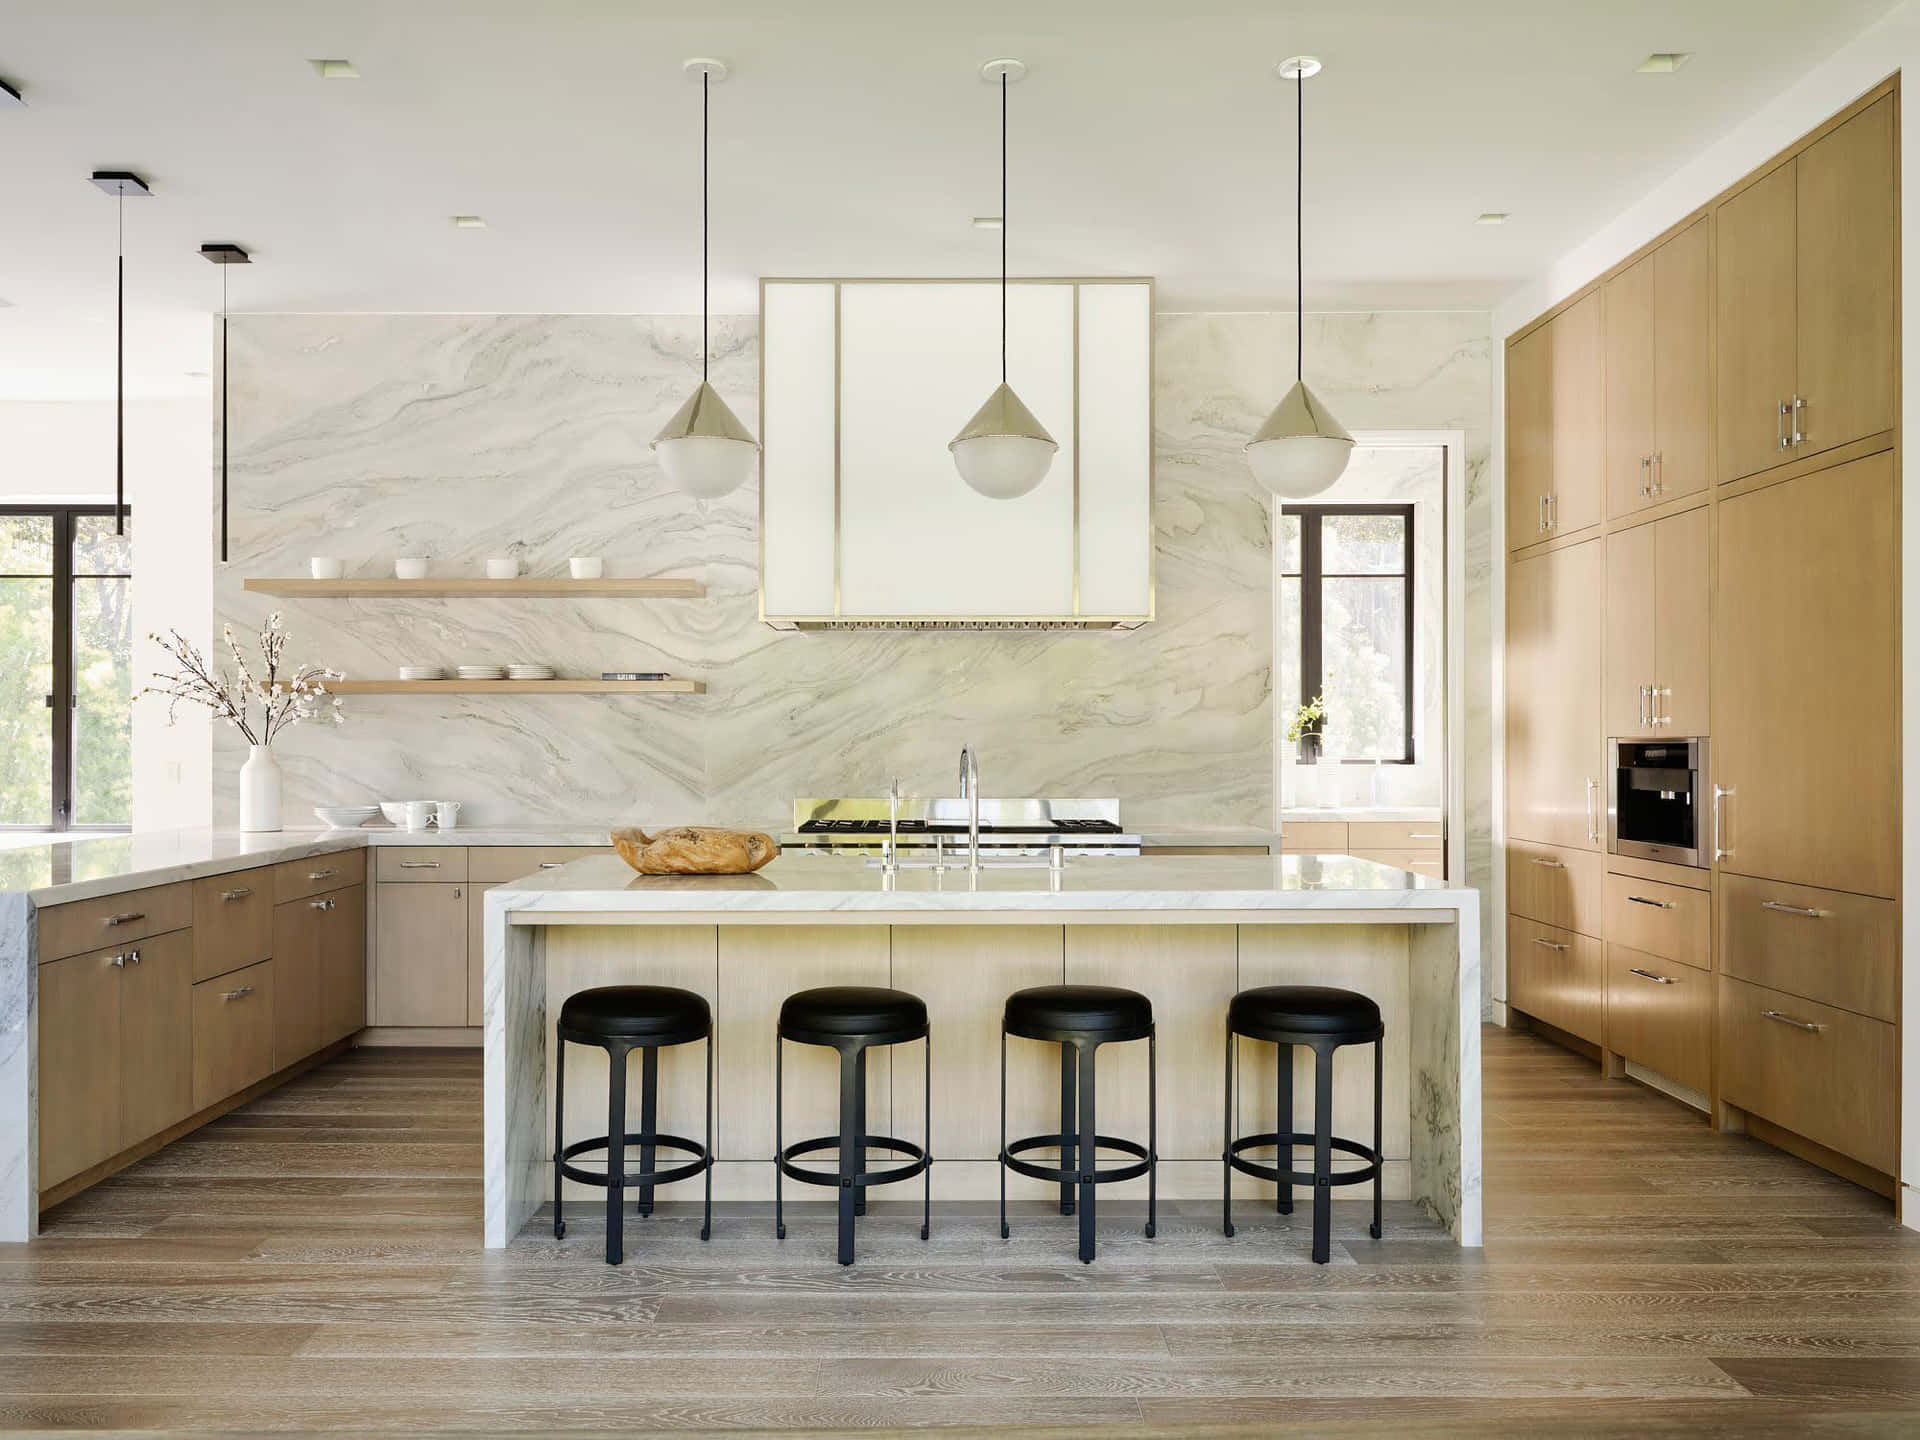 A Modern Kitchen With Wooden Floors And Stools